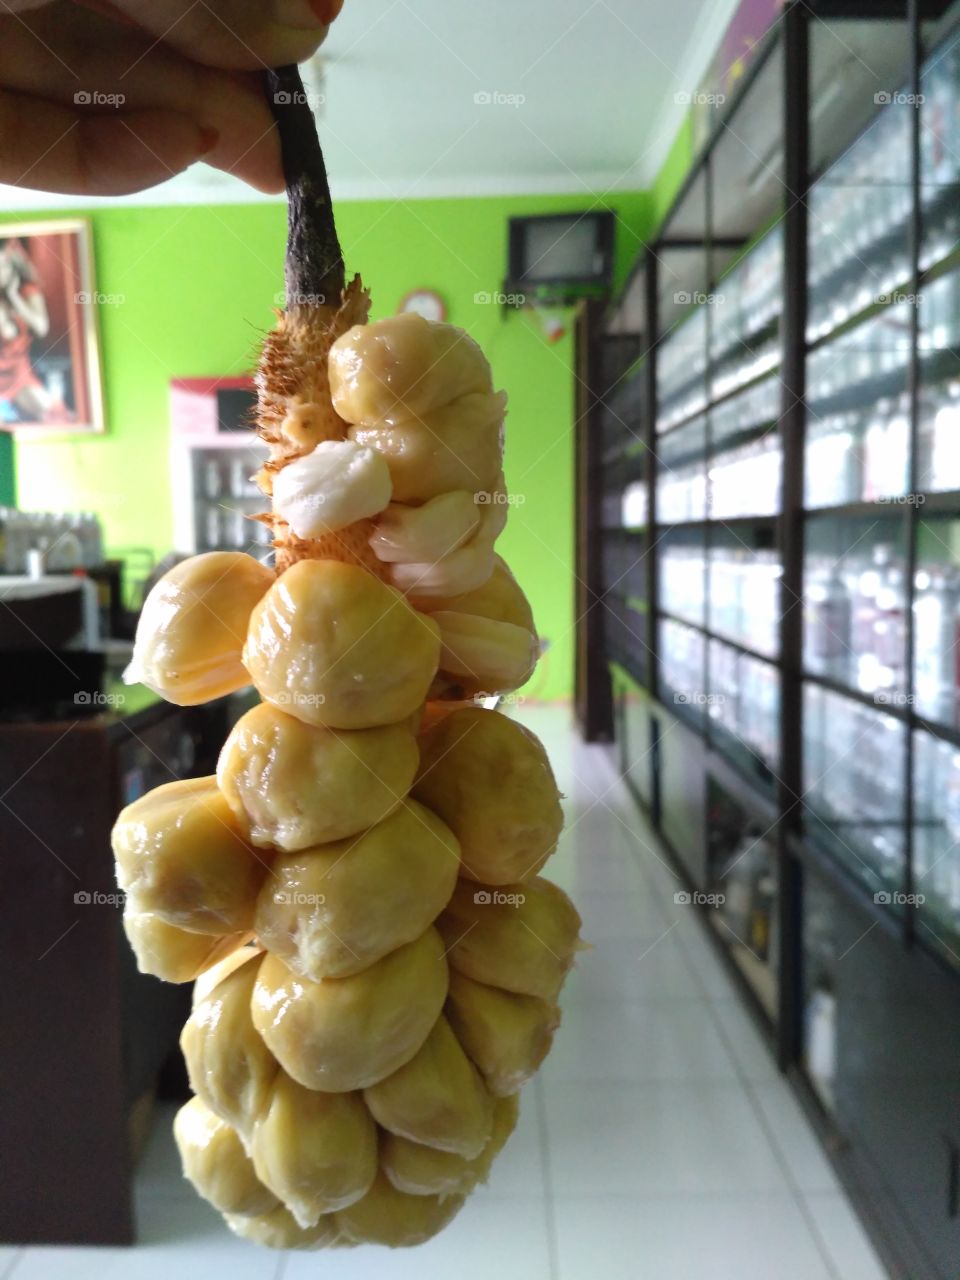 Cempedak fruit taught that something that is good, does not mean there is no effort we are to fix it and develop it.